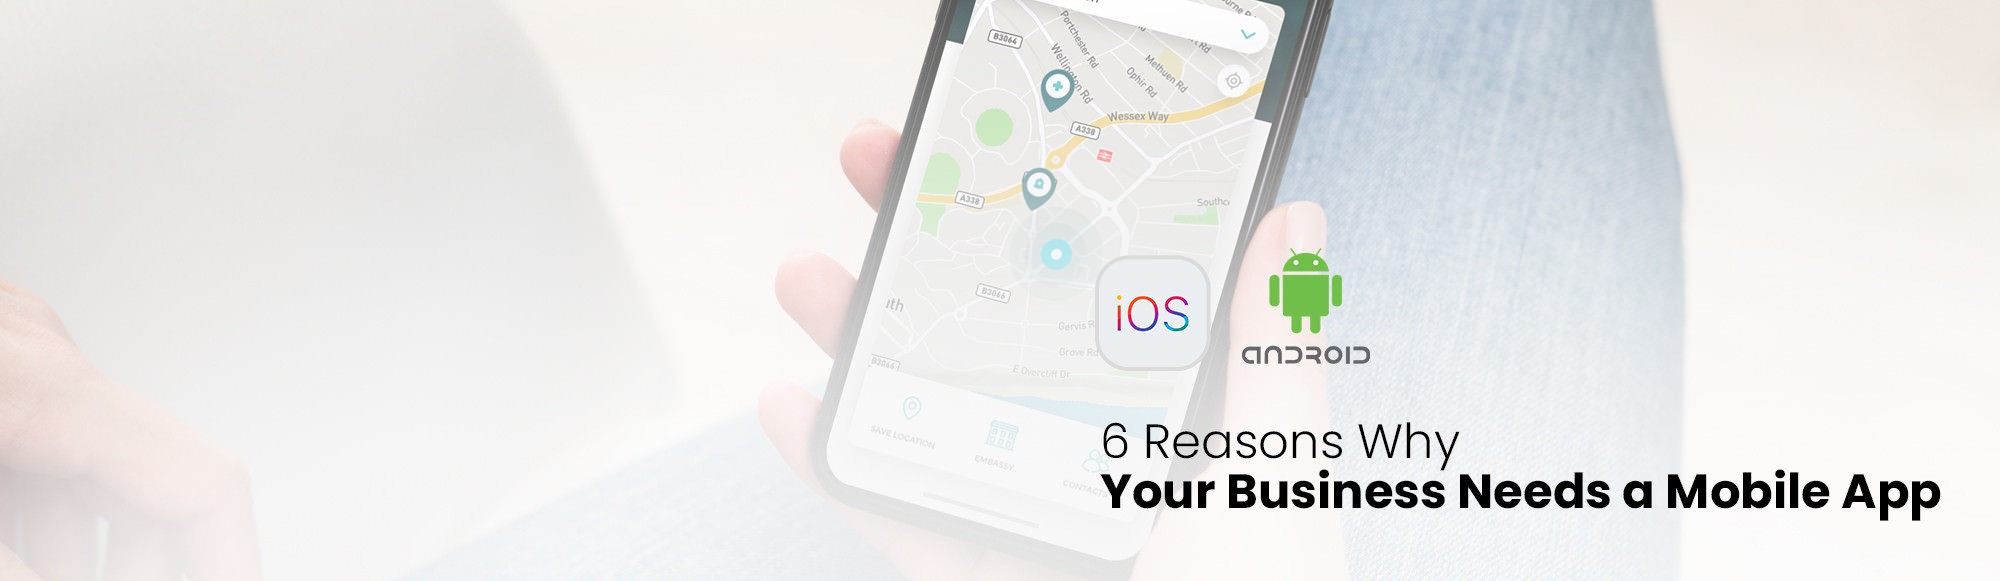 6 Reasons Why Your Business Needs a Mobile App in Dubai